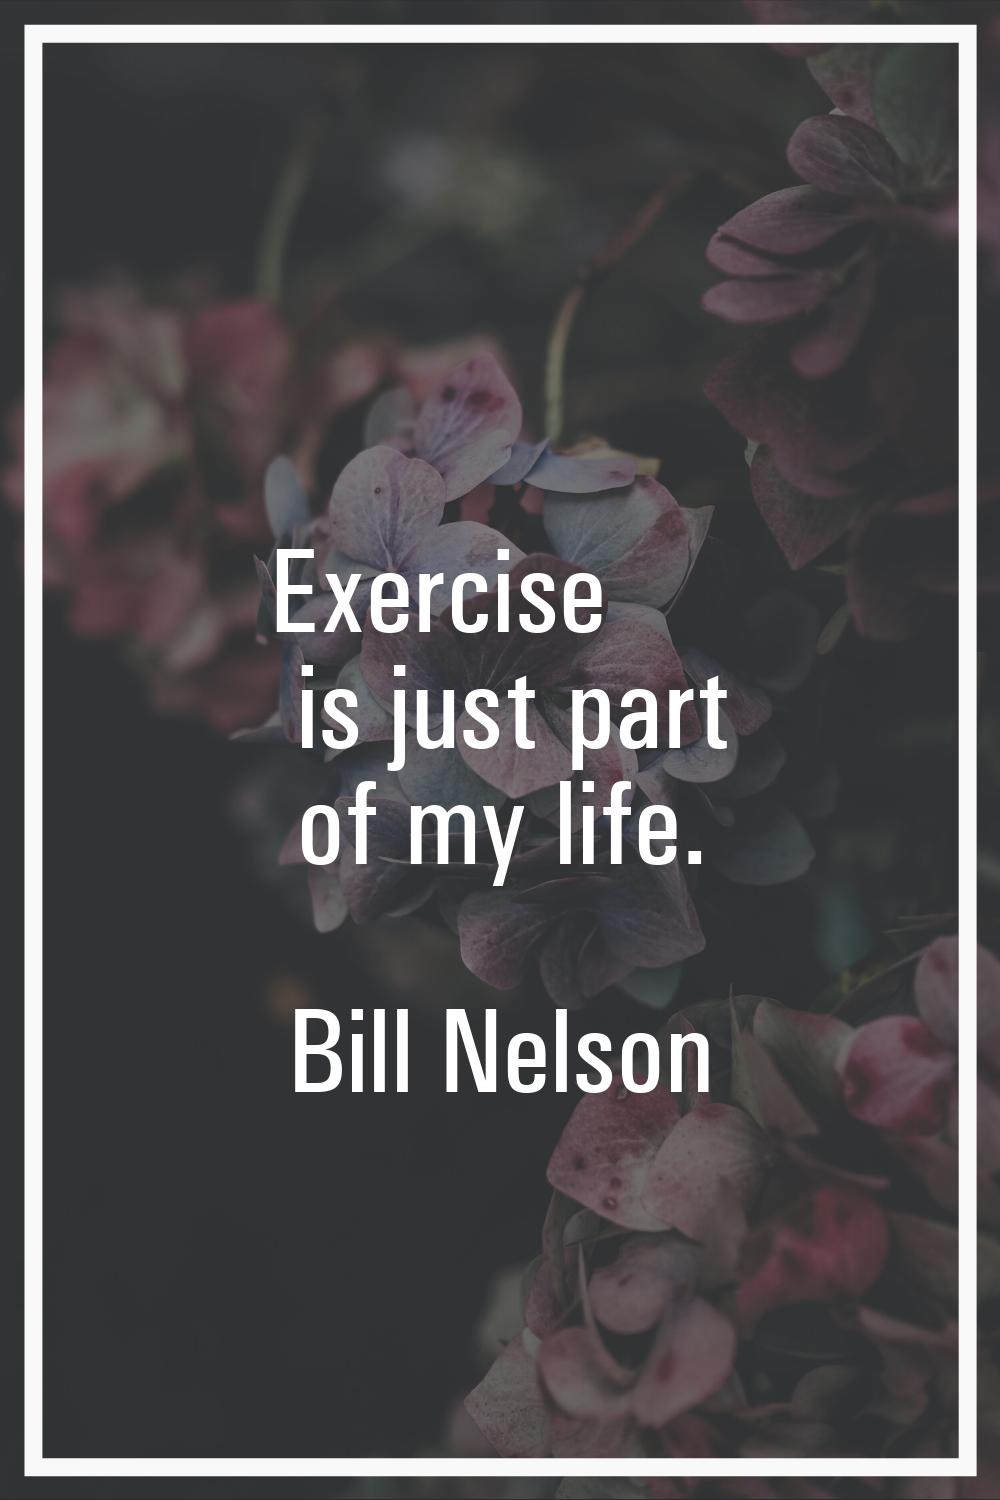 Exercise is just part of my life.